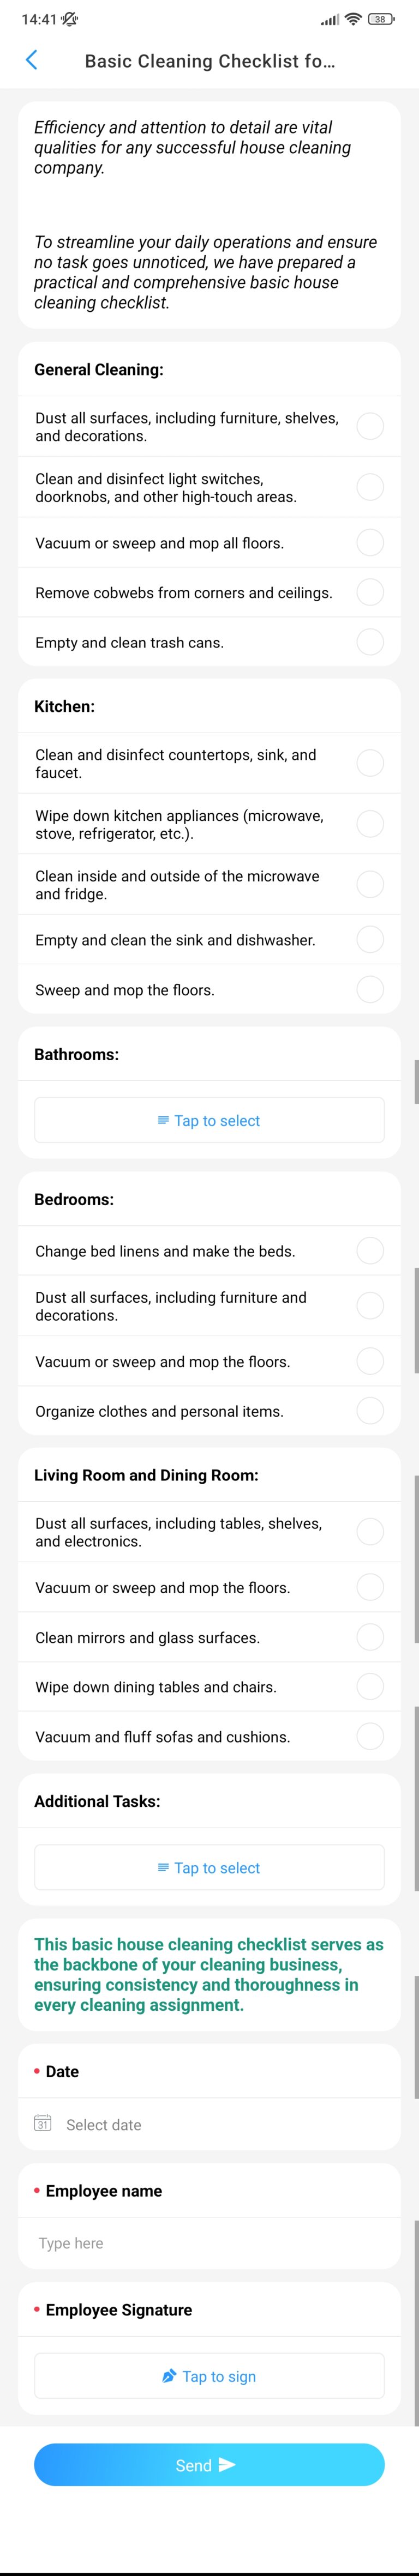 Basic Cleaning Checklist for House Cleaning Companies screenshot